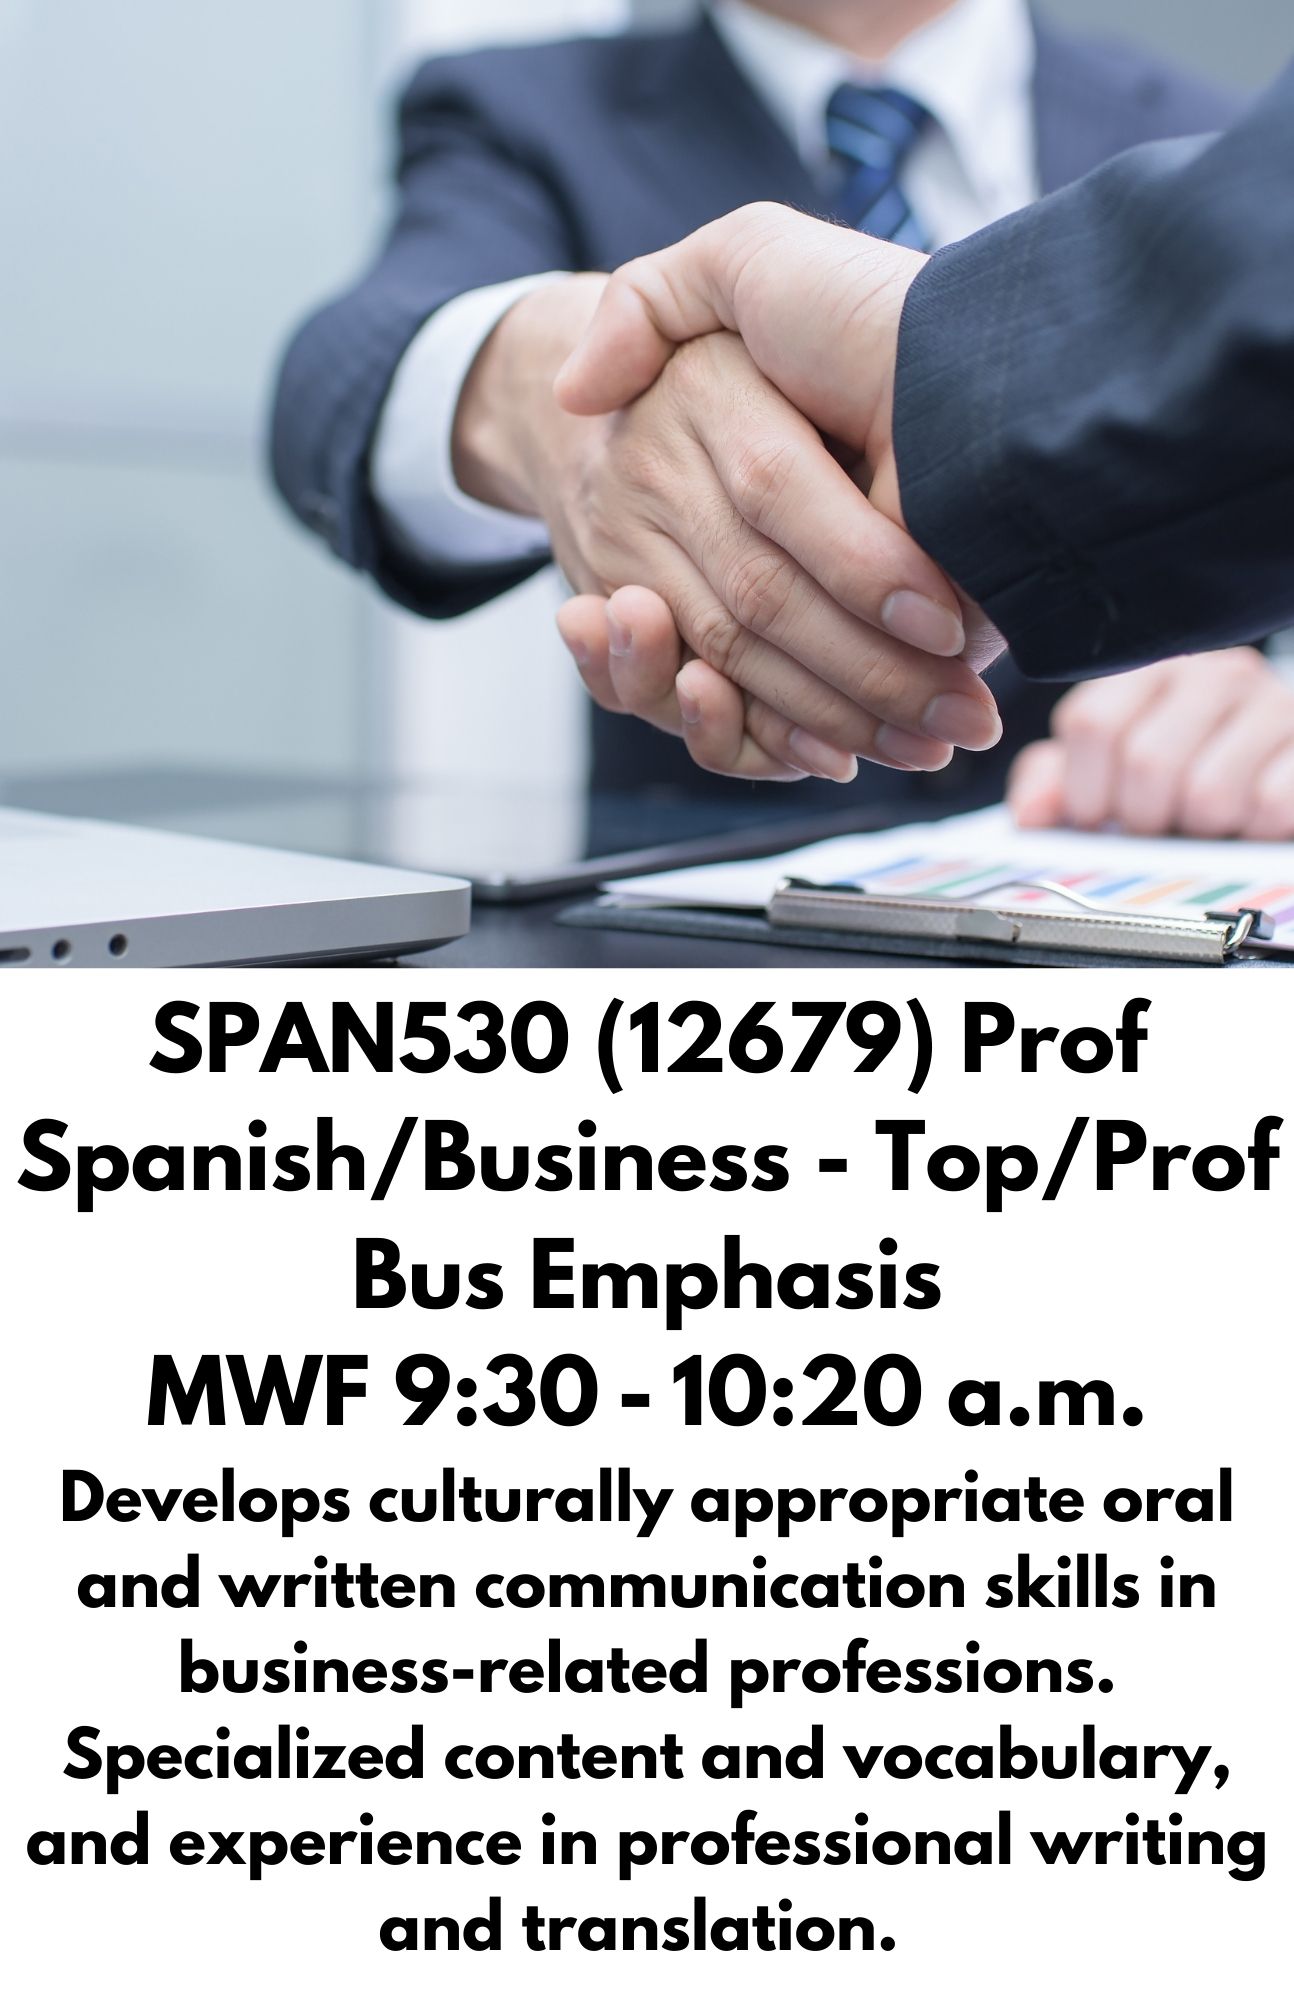 SPAN530 (12679) Prof Spanish/Business - Top/Prof Bus Emphasis MWF 9:30 - 10:20 a.m. Develops culturally appropriate oral and written communication skills in business-related professions. Specialized content and vocabulary, and experience in professional writing and translation.